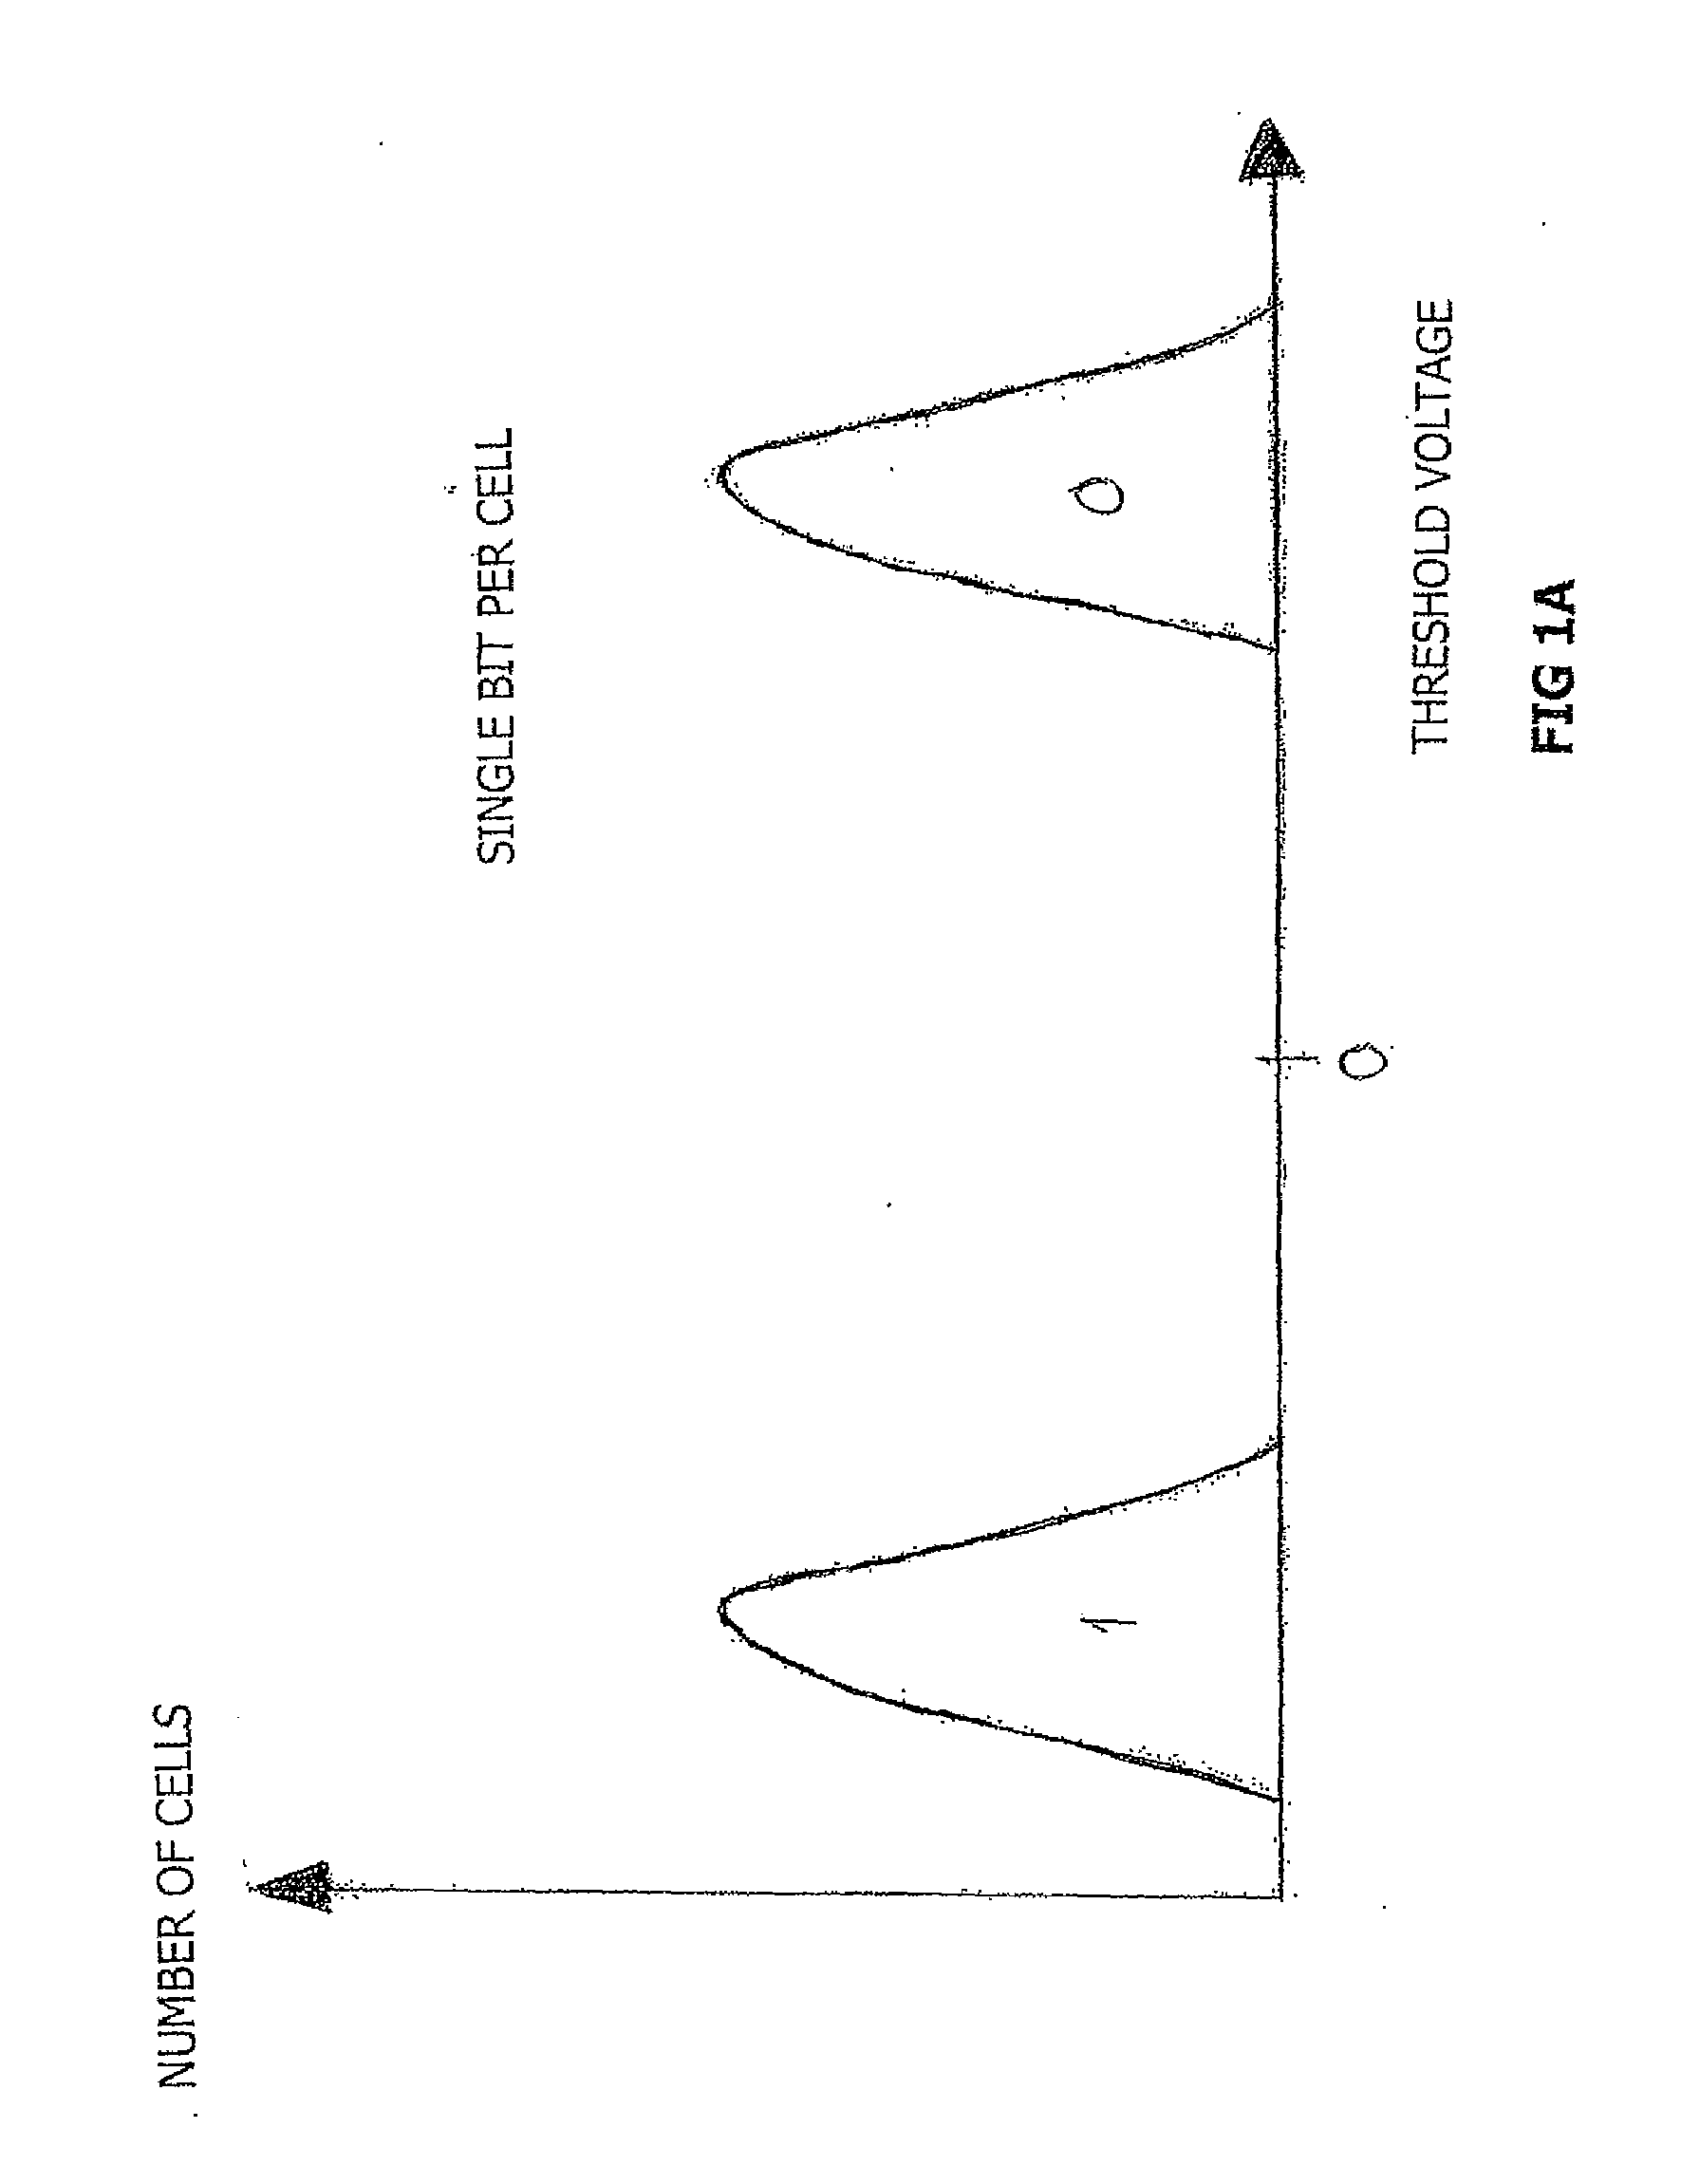 Controller, System, and Method for Mapping Logical Sector Addresses to Physical Addresses